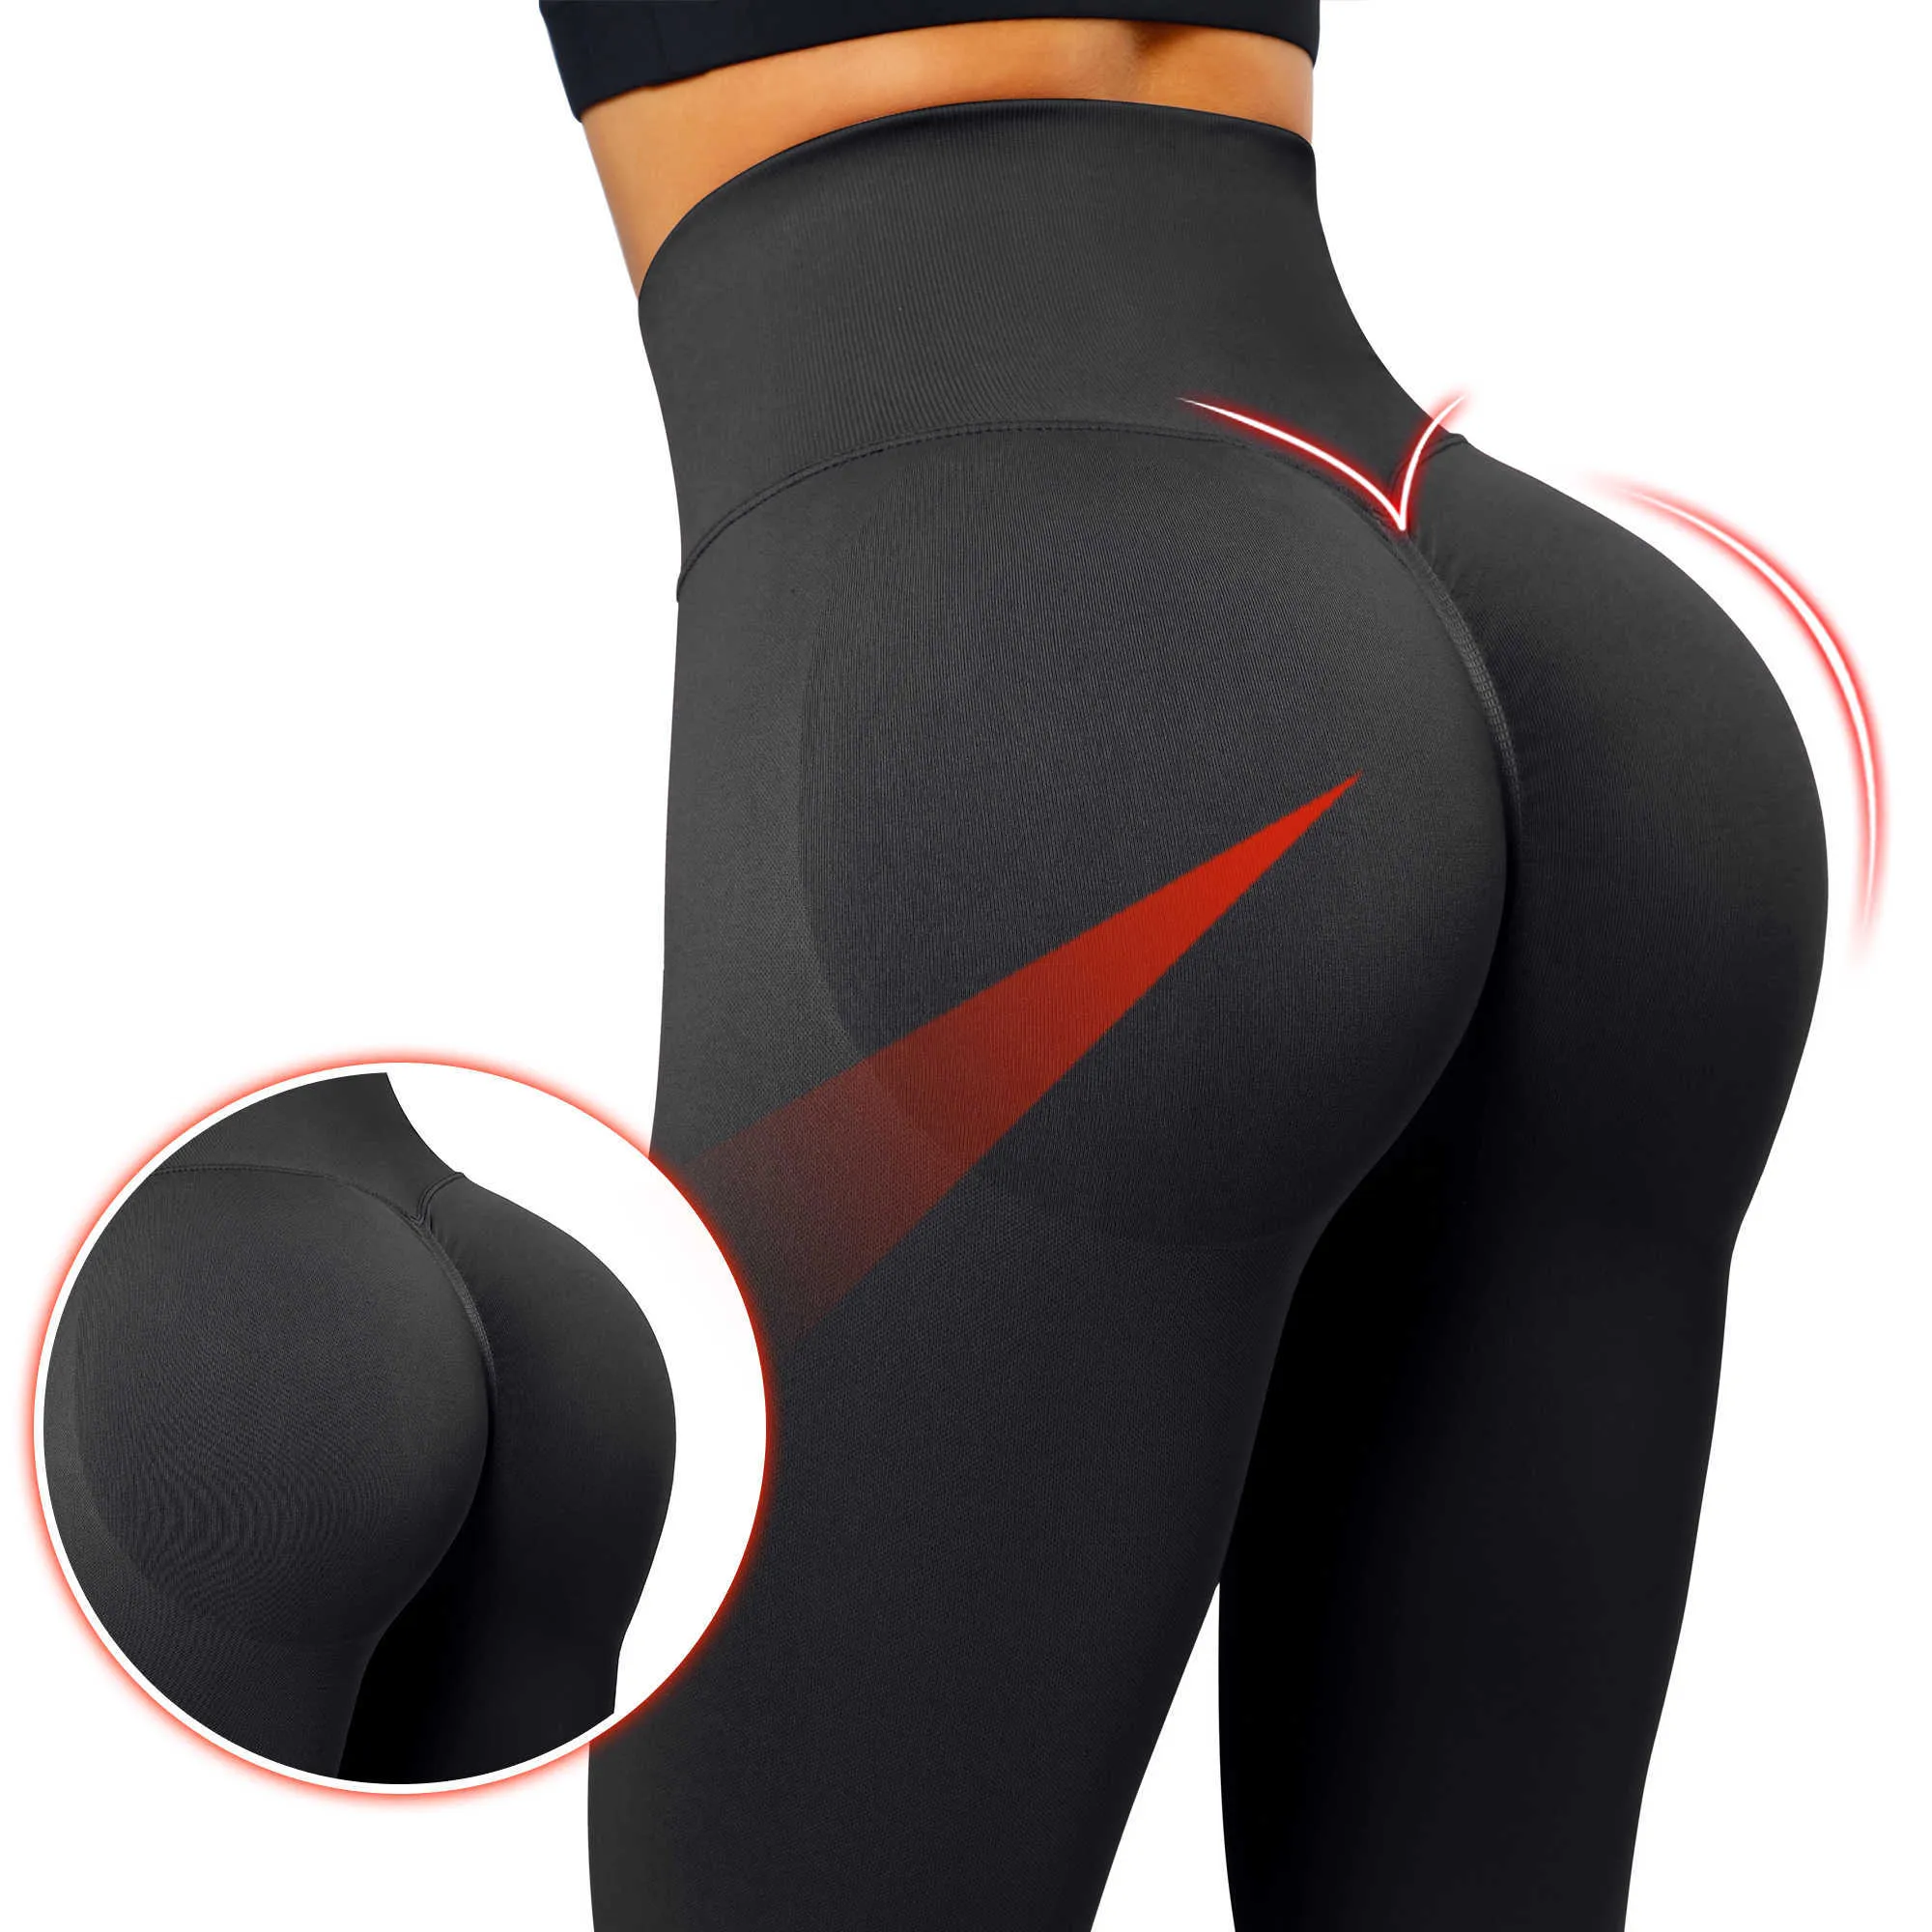 RUUHEE Seamless Yoga High Waisted Gym Leggings With Scrunch Butt Lifting  And High Waisted Design For Women Perfect For Fitness And Workouts T230211  From Sts_018, $14.17